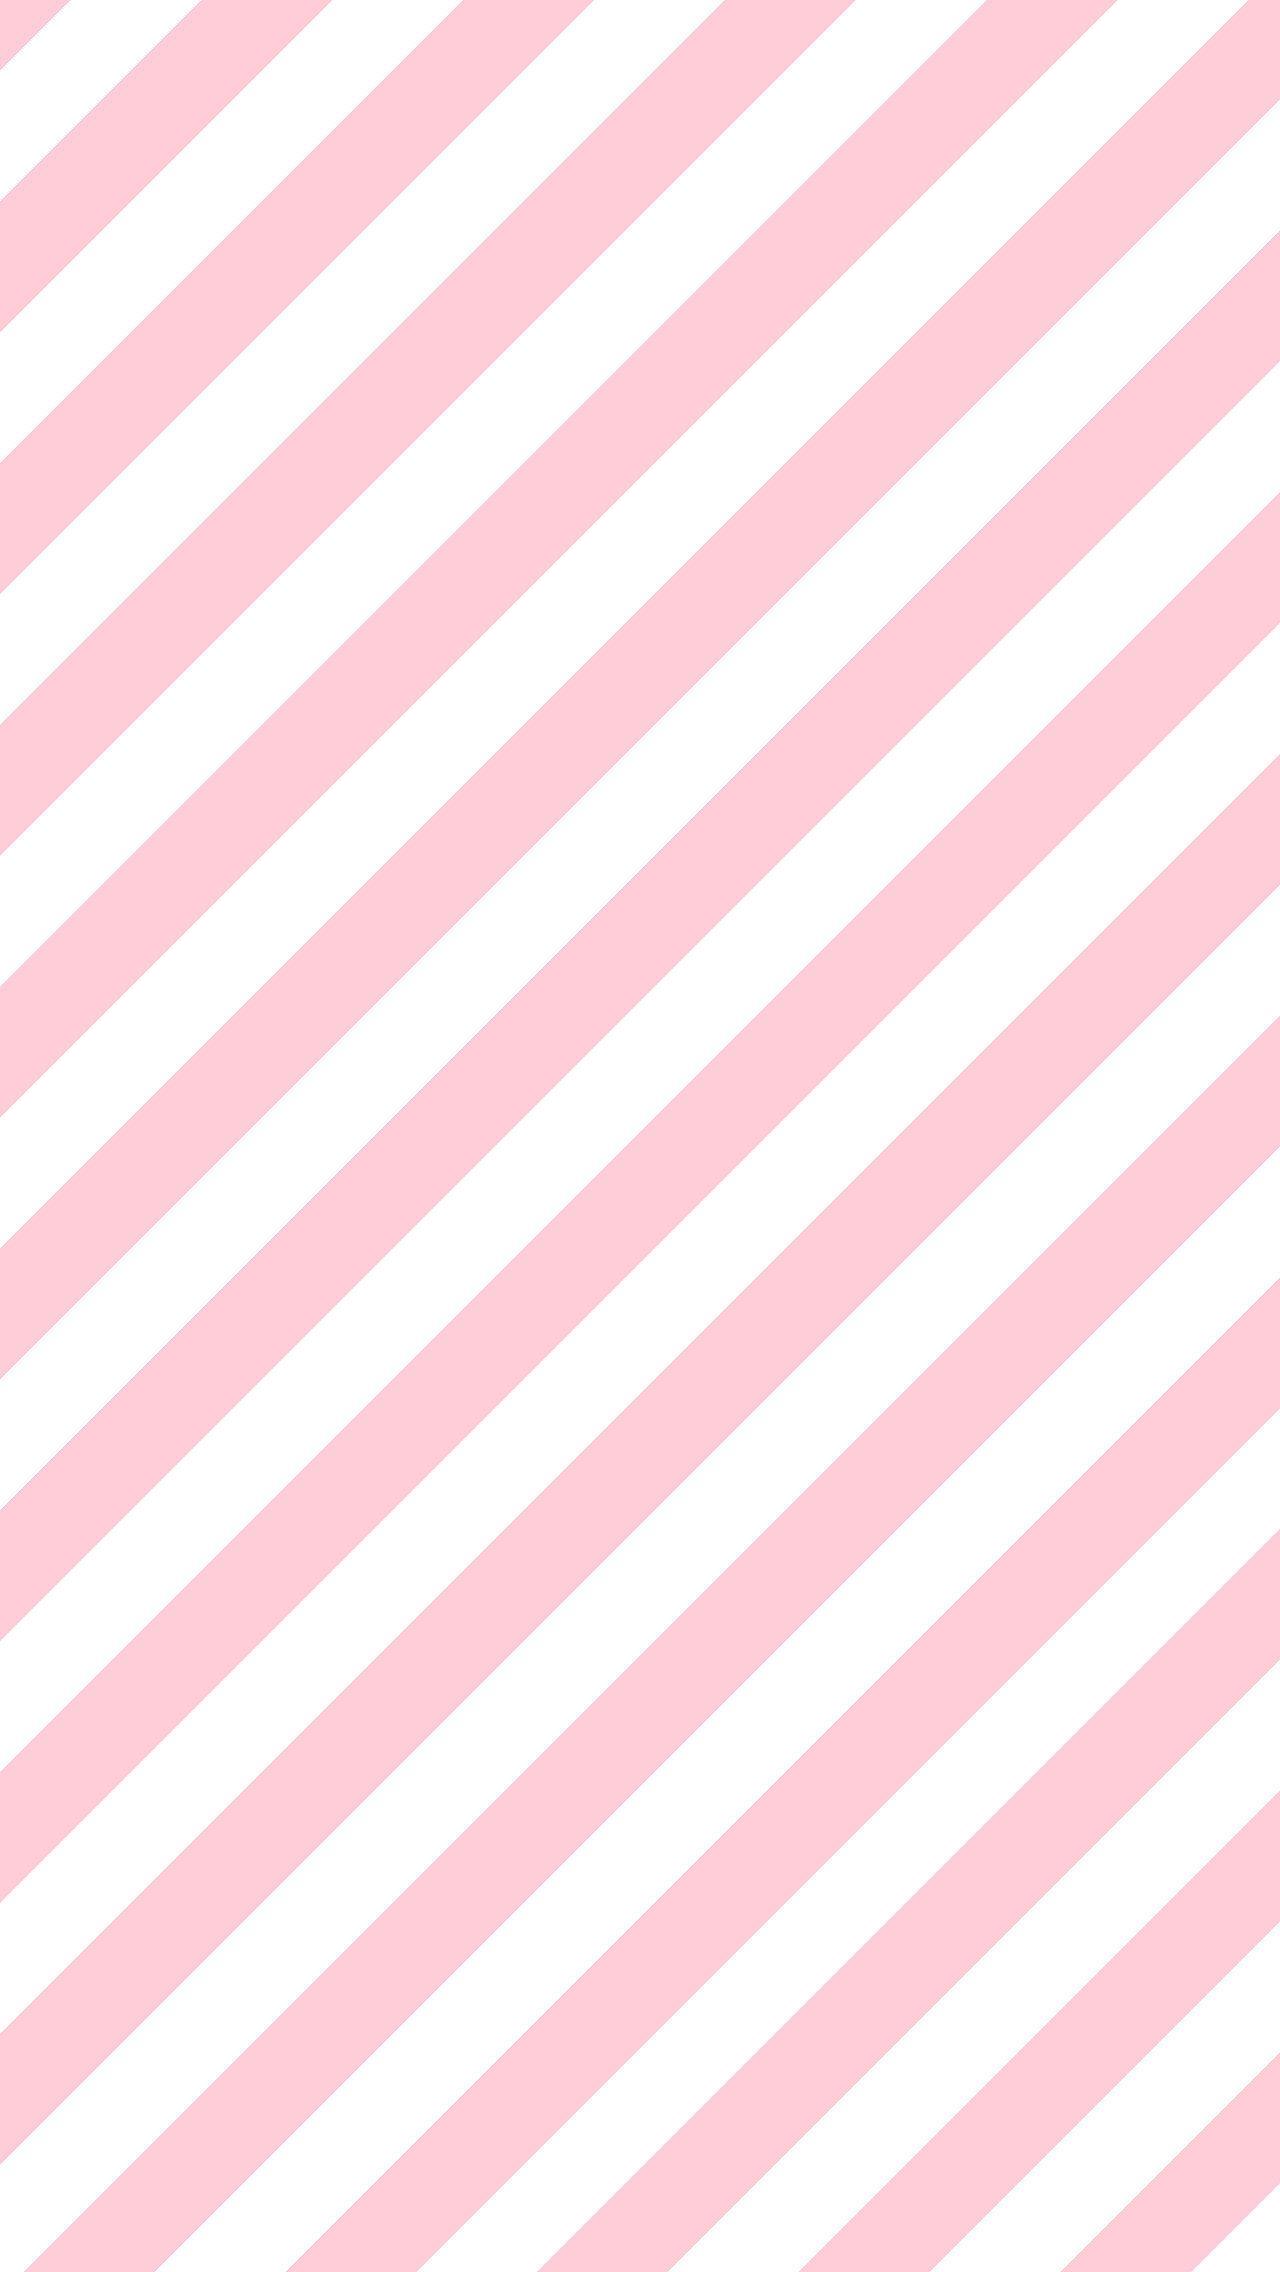 Pink Stripes. Cool iphone 6 wallpaper, Preppy wallpaper, Best iphone wallpaper